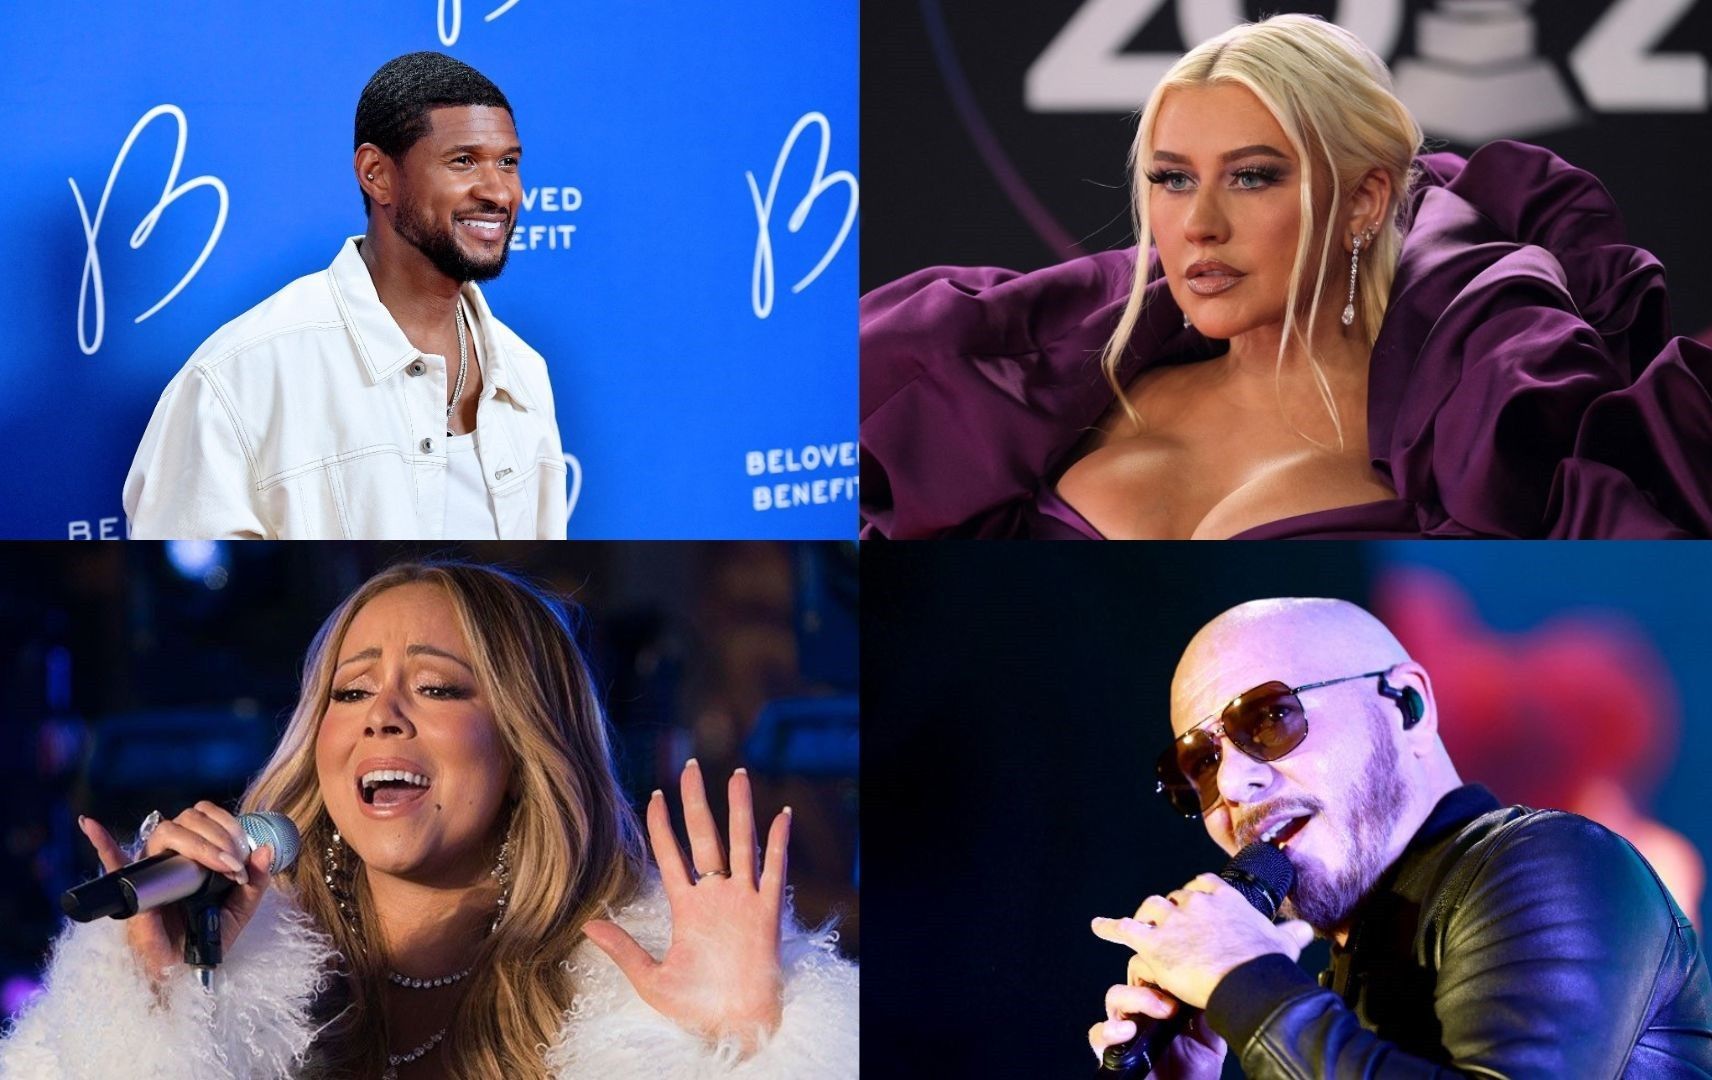 Mariah Carey, Pitbull and more at Usher's 'Lovers & Friends' music